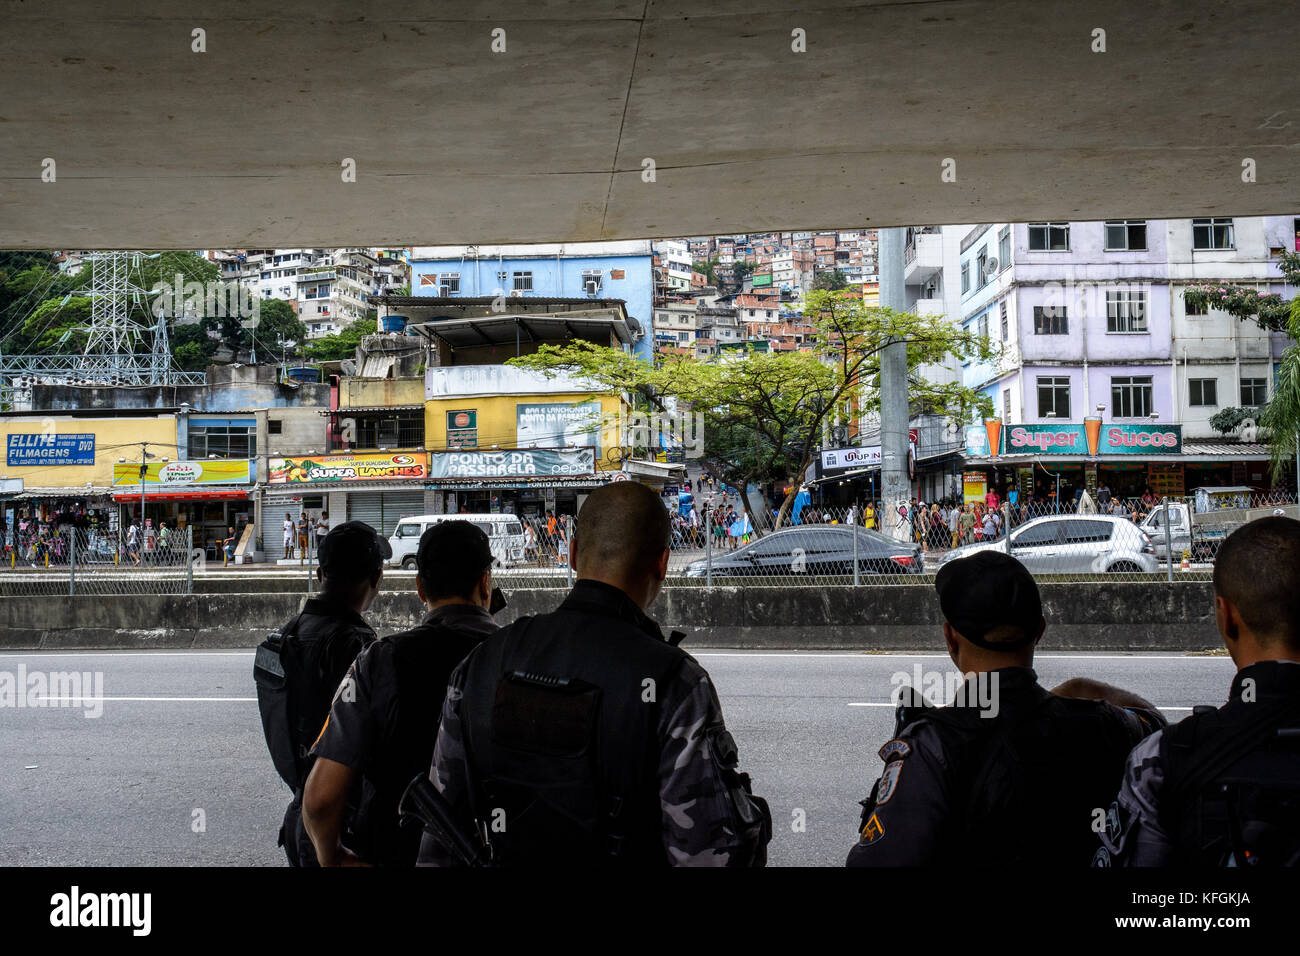 Rio De Janeiro, Brazil. 28th Oct, 2017. Members of the military police look on at the entrance of Rocinha during protests against police violence this Saturday, Oct. 28th, in Rio De Janeiro. There has been an uptick in conflicts in the favela since the police presence was increased following gang violence. Credit: C.H. Gardiner/Pacific Press/Alamy Live News Stock Photo